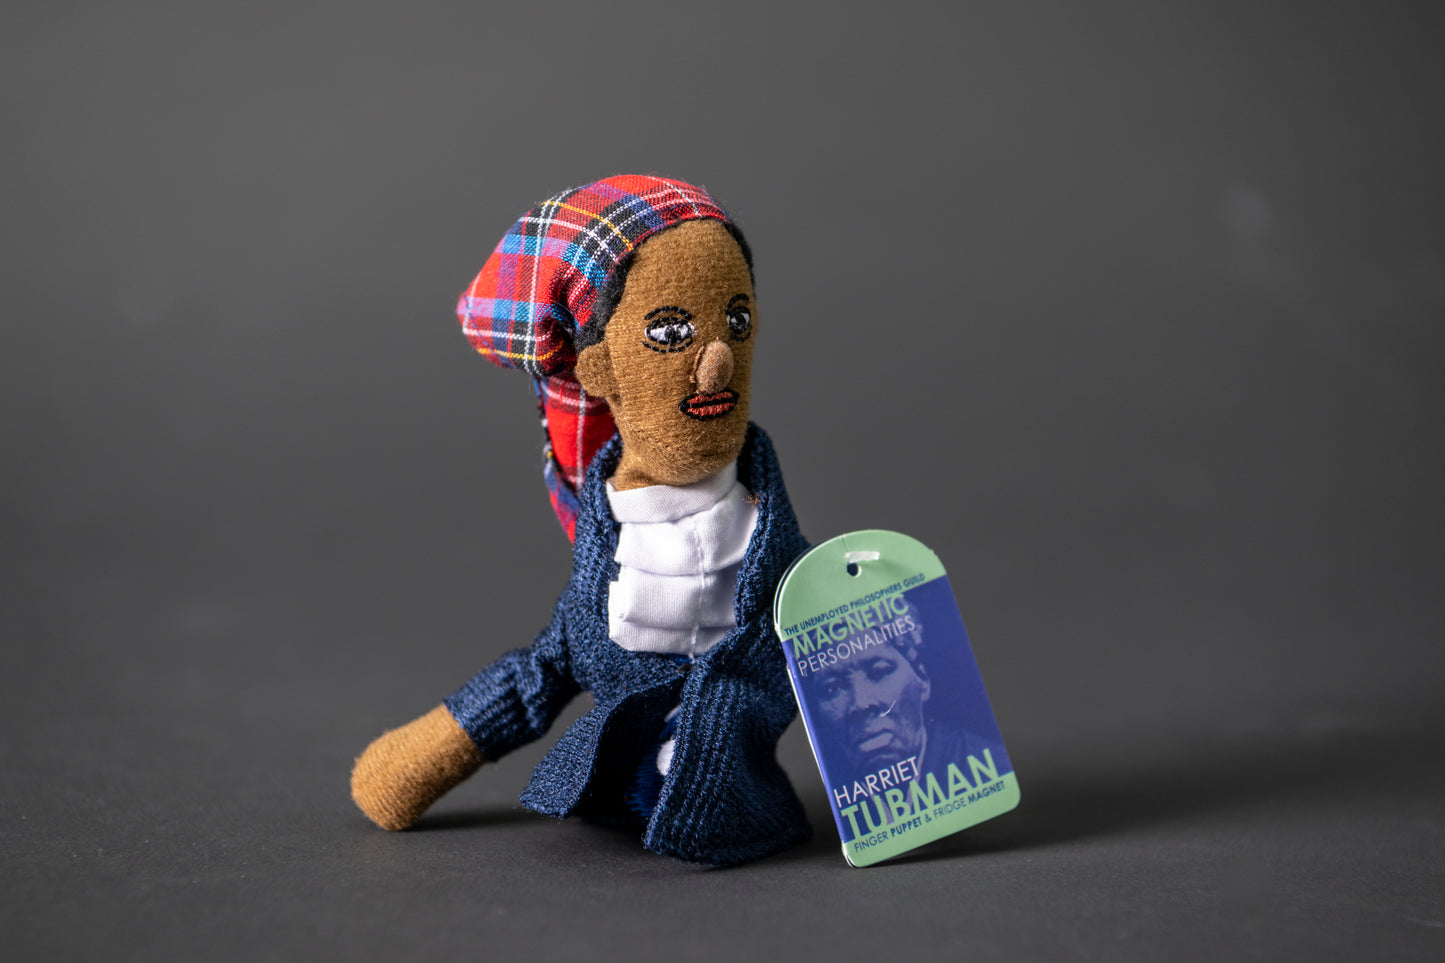 Harriet Tubman Magnetic Personality Finger Puppet